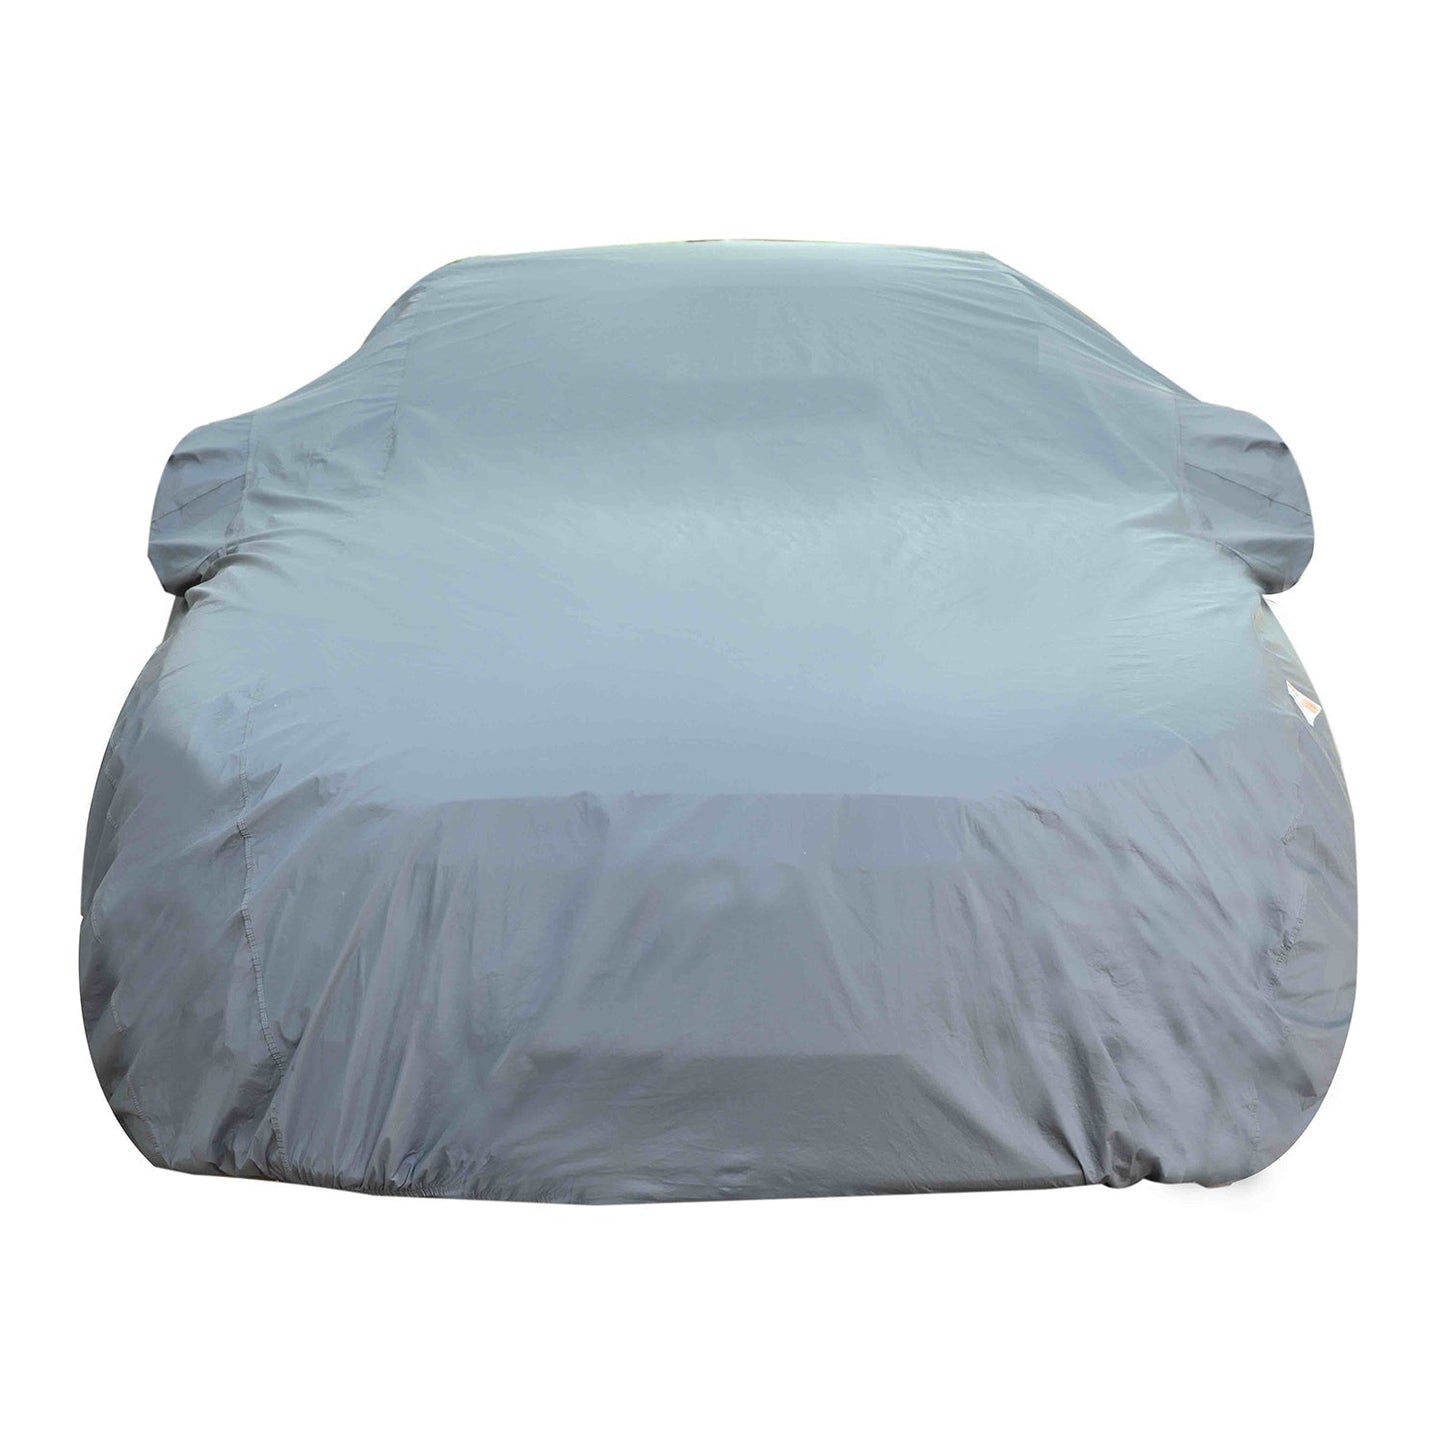 Oshotto Dark Grey 100% Anti Reflective, dustproof and Water Proof Car Body Cover with Mirror Pockets For Tata Safari/Strome